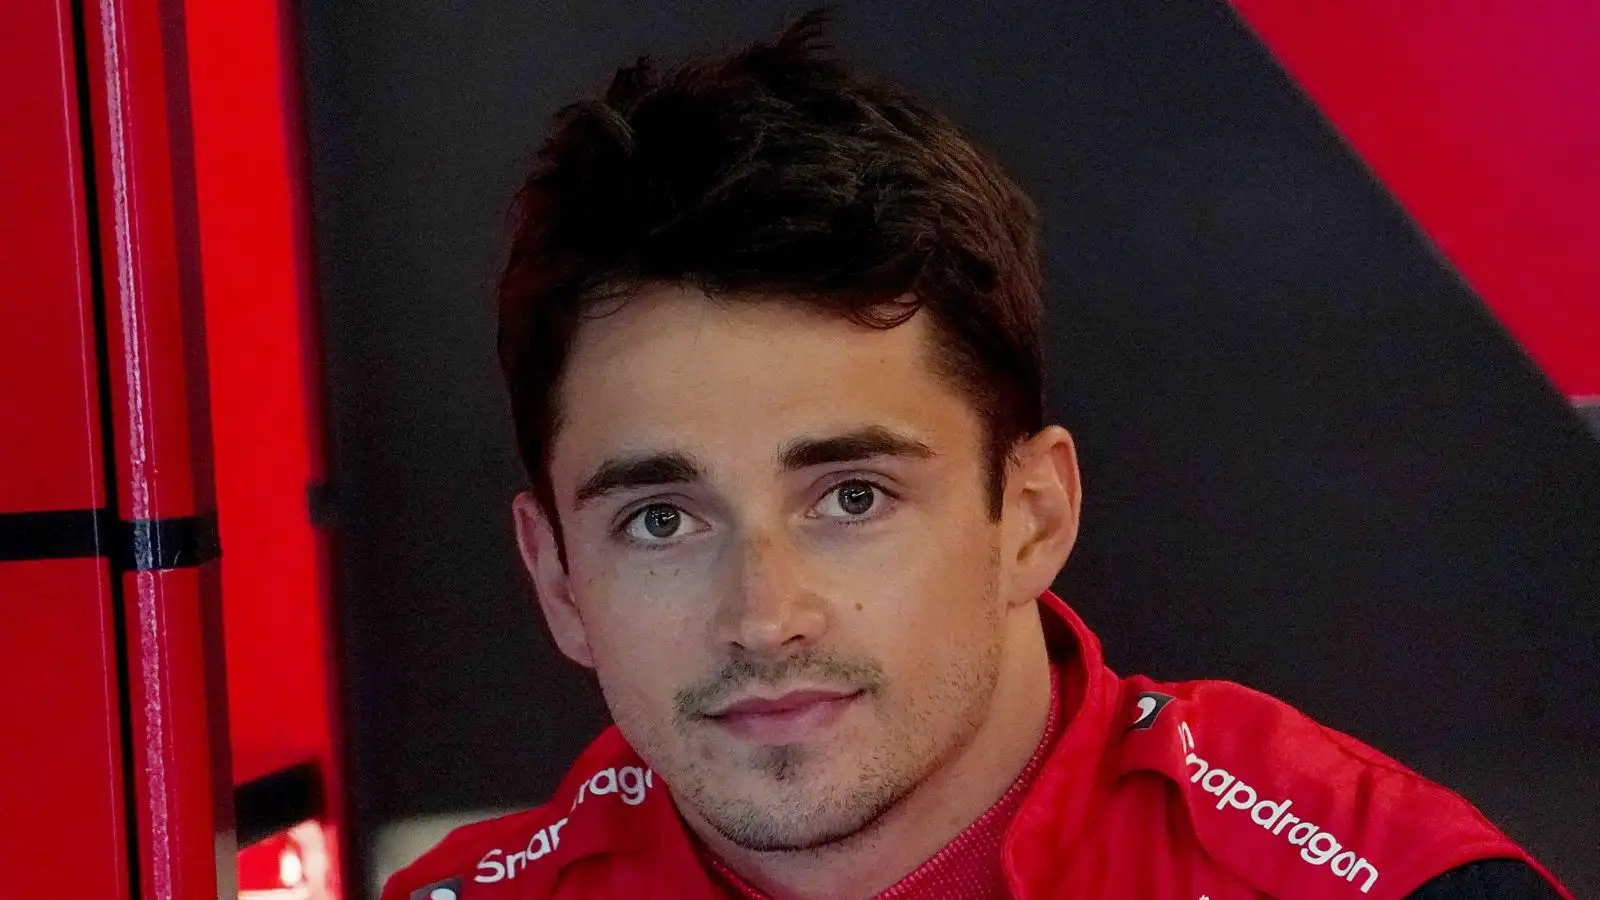 Charles Leclerc looks at the camera and smiles. Imola, April 2022.